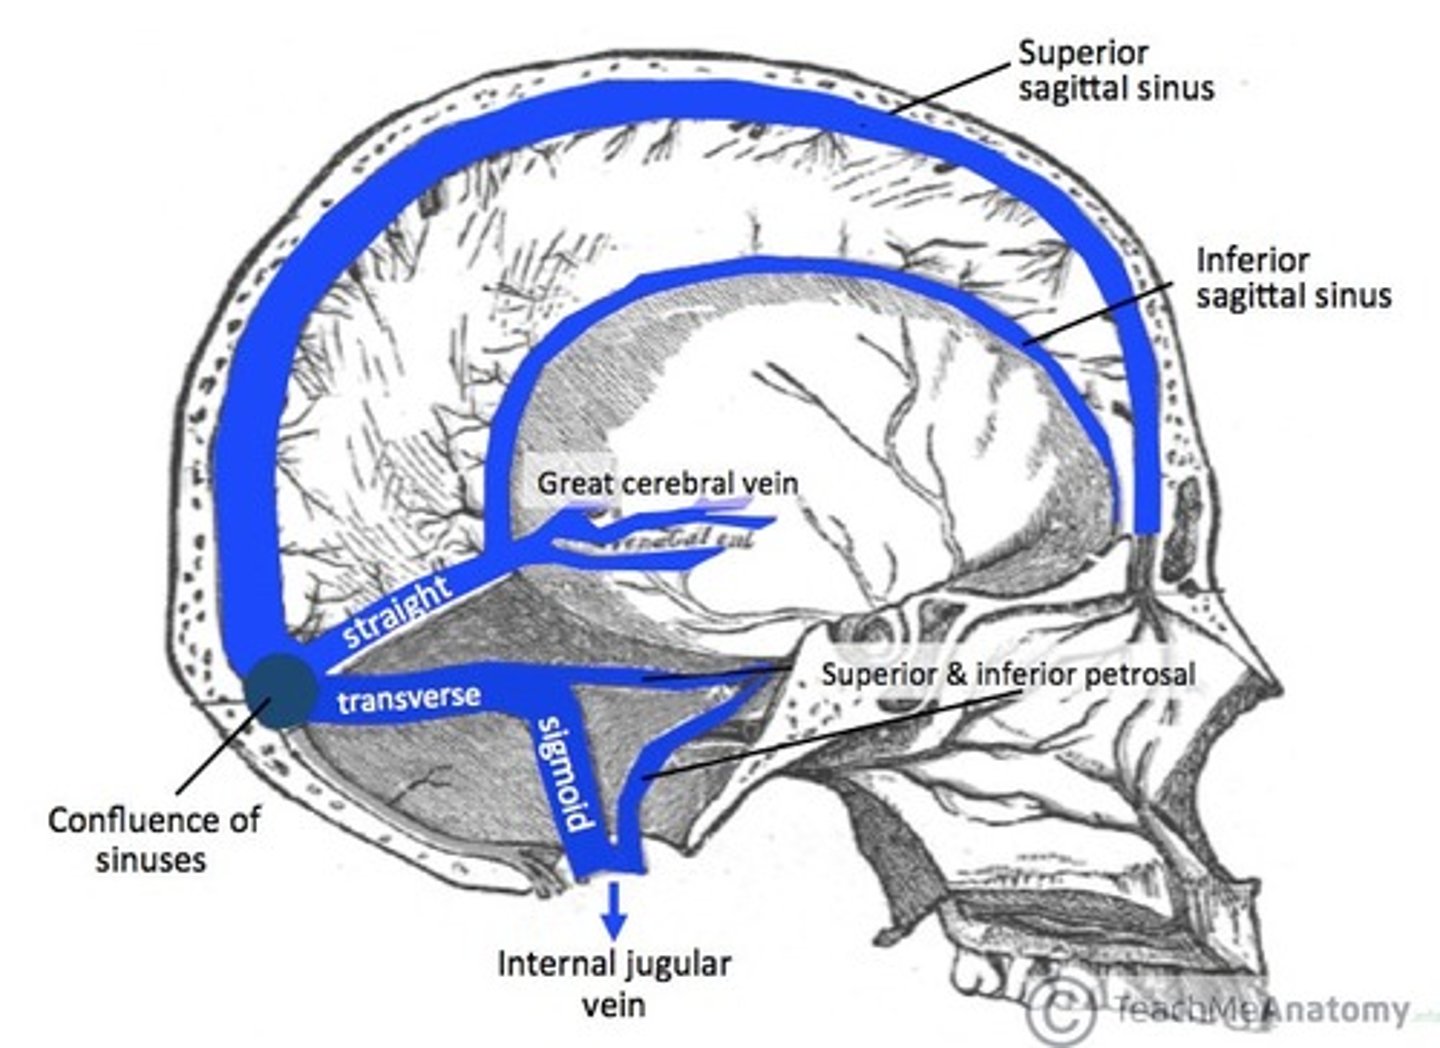 <p>The cerebral veins empty into the dural venous sinuses situated within the subarachnoid space. The superficial system drains into the superior sagittal sinus, while the deep system drains into transverse, straight and sigmoid sinuses.</p>